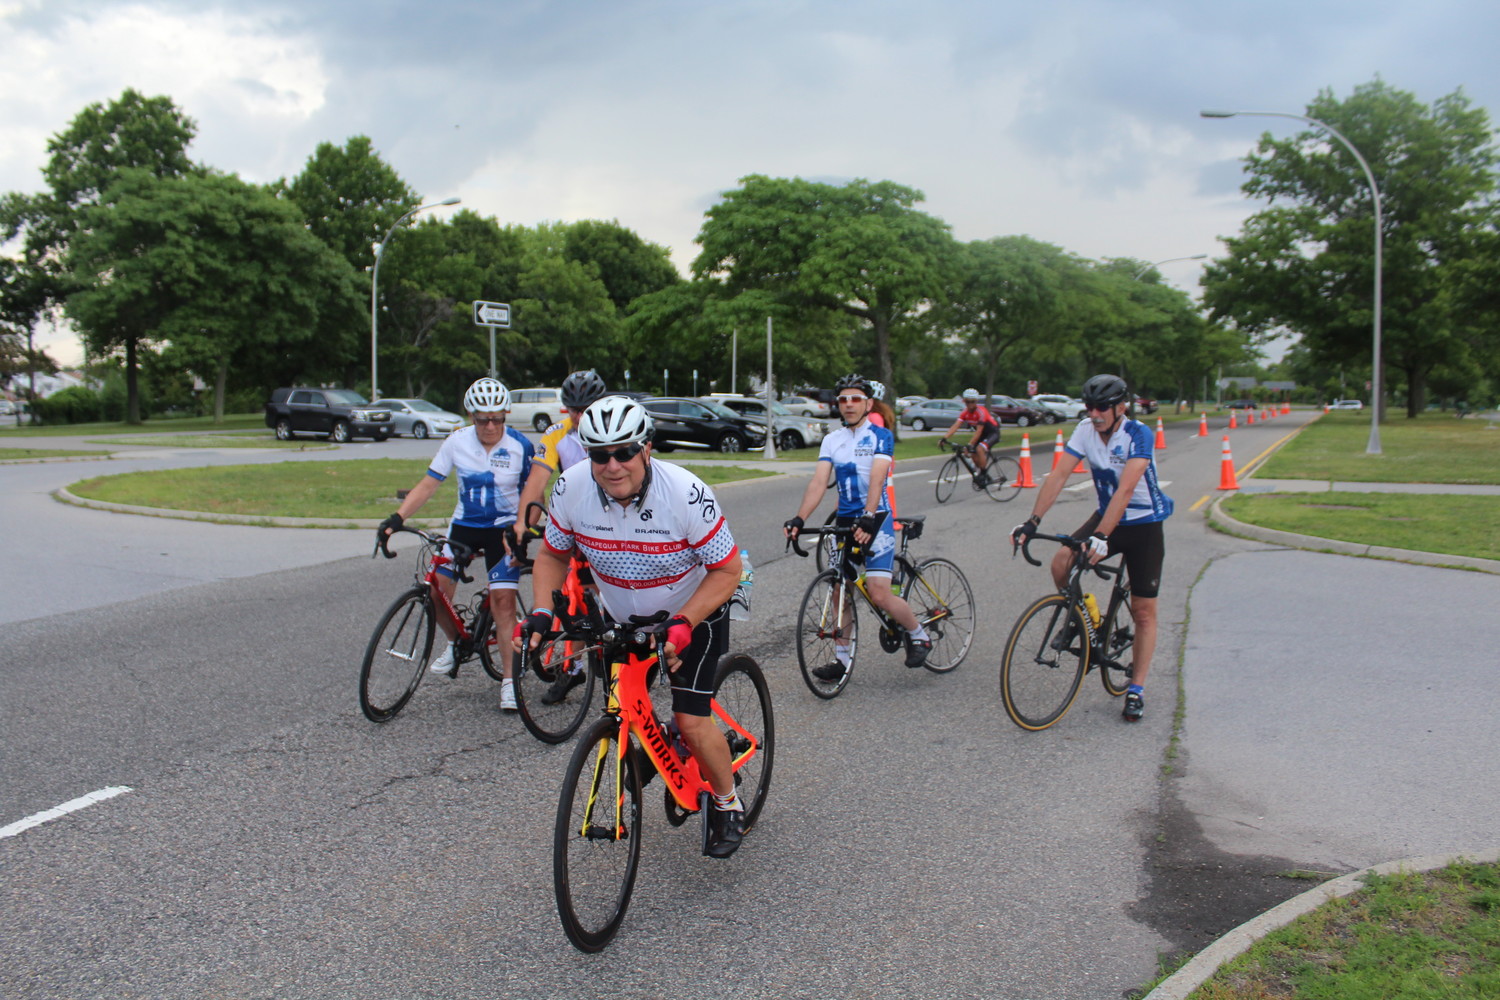 James Matone/Herald-Citizen
Phil Kingsbury, in front, began his 24-hour bike ride on June 28 at 6 p.m. with some local cyclists. A few miles into his journey, the skies opened up, forcing him and his crew to ride through the rain.